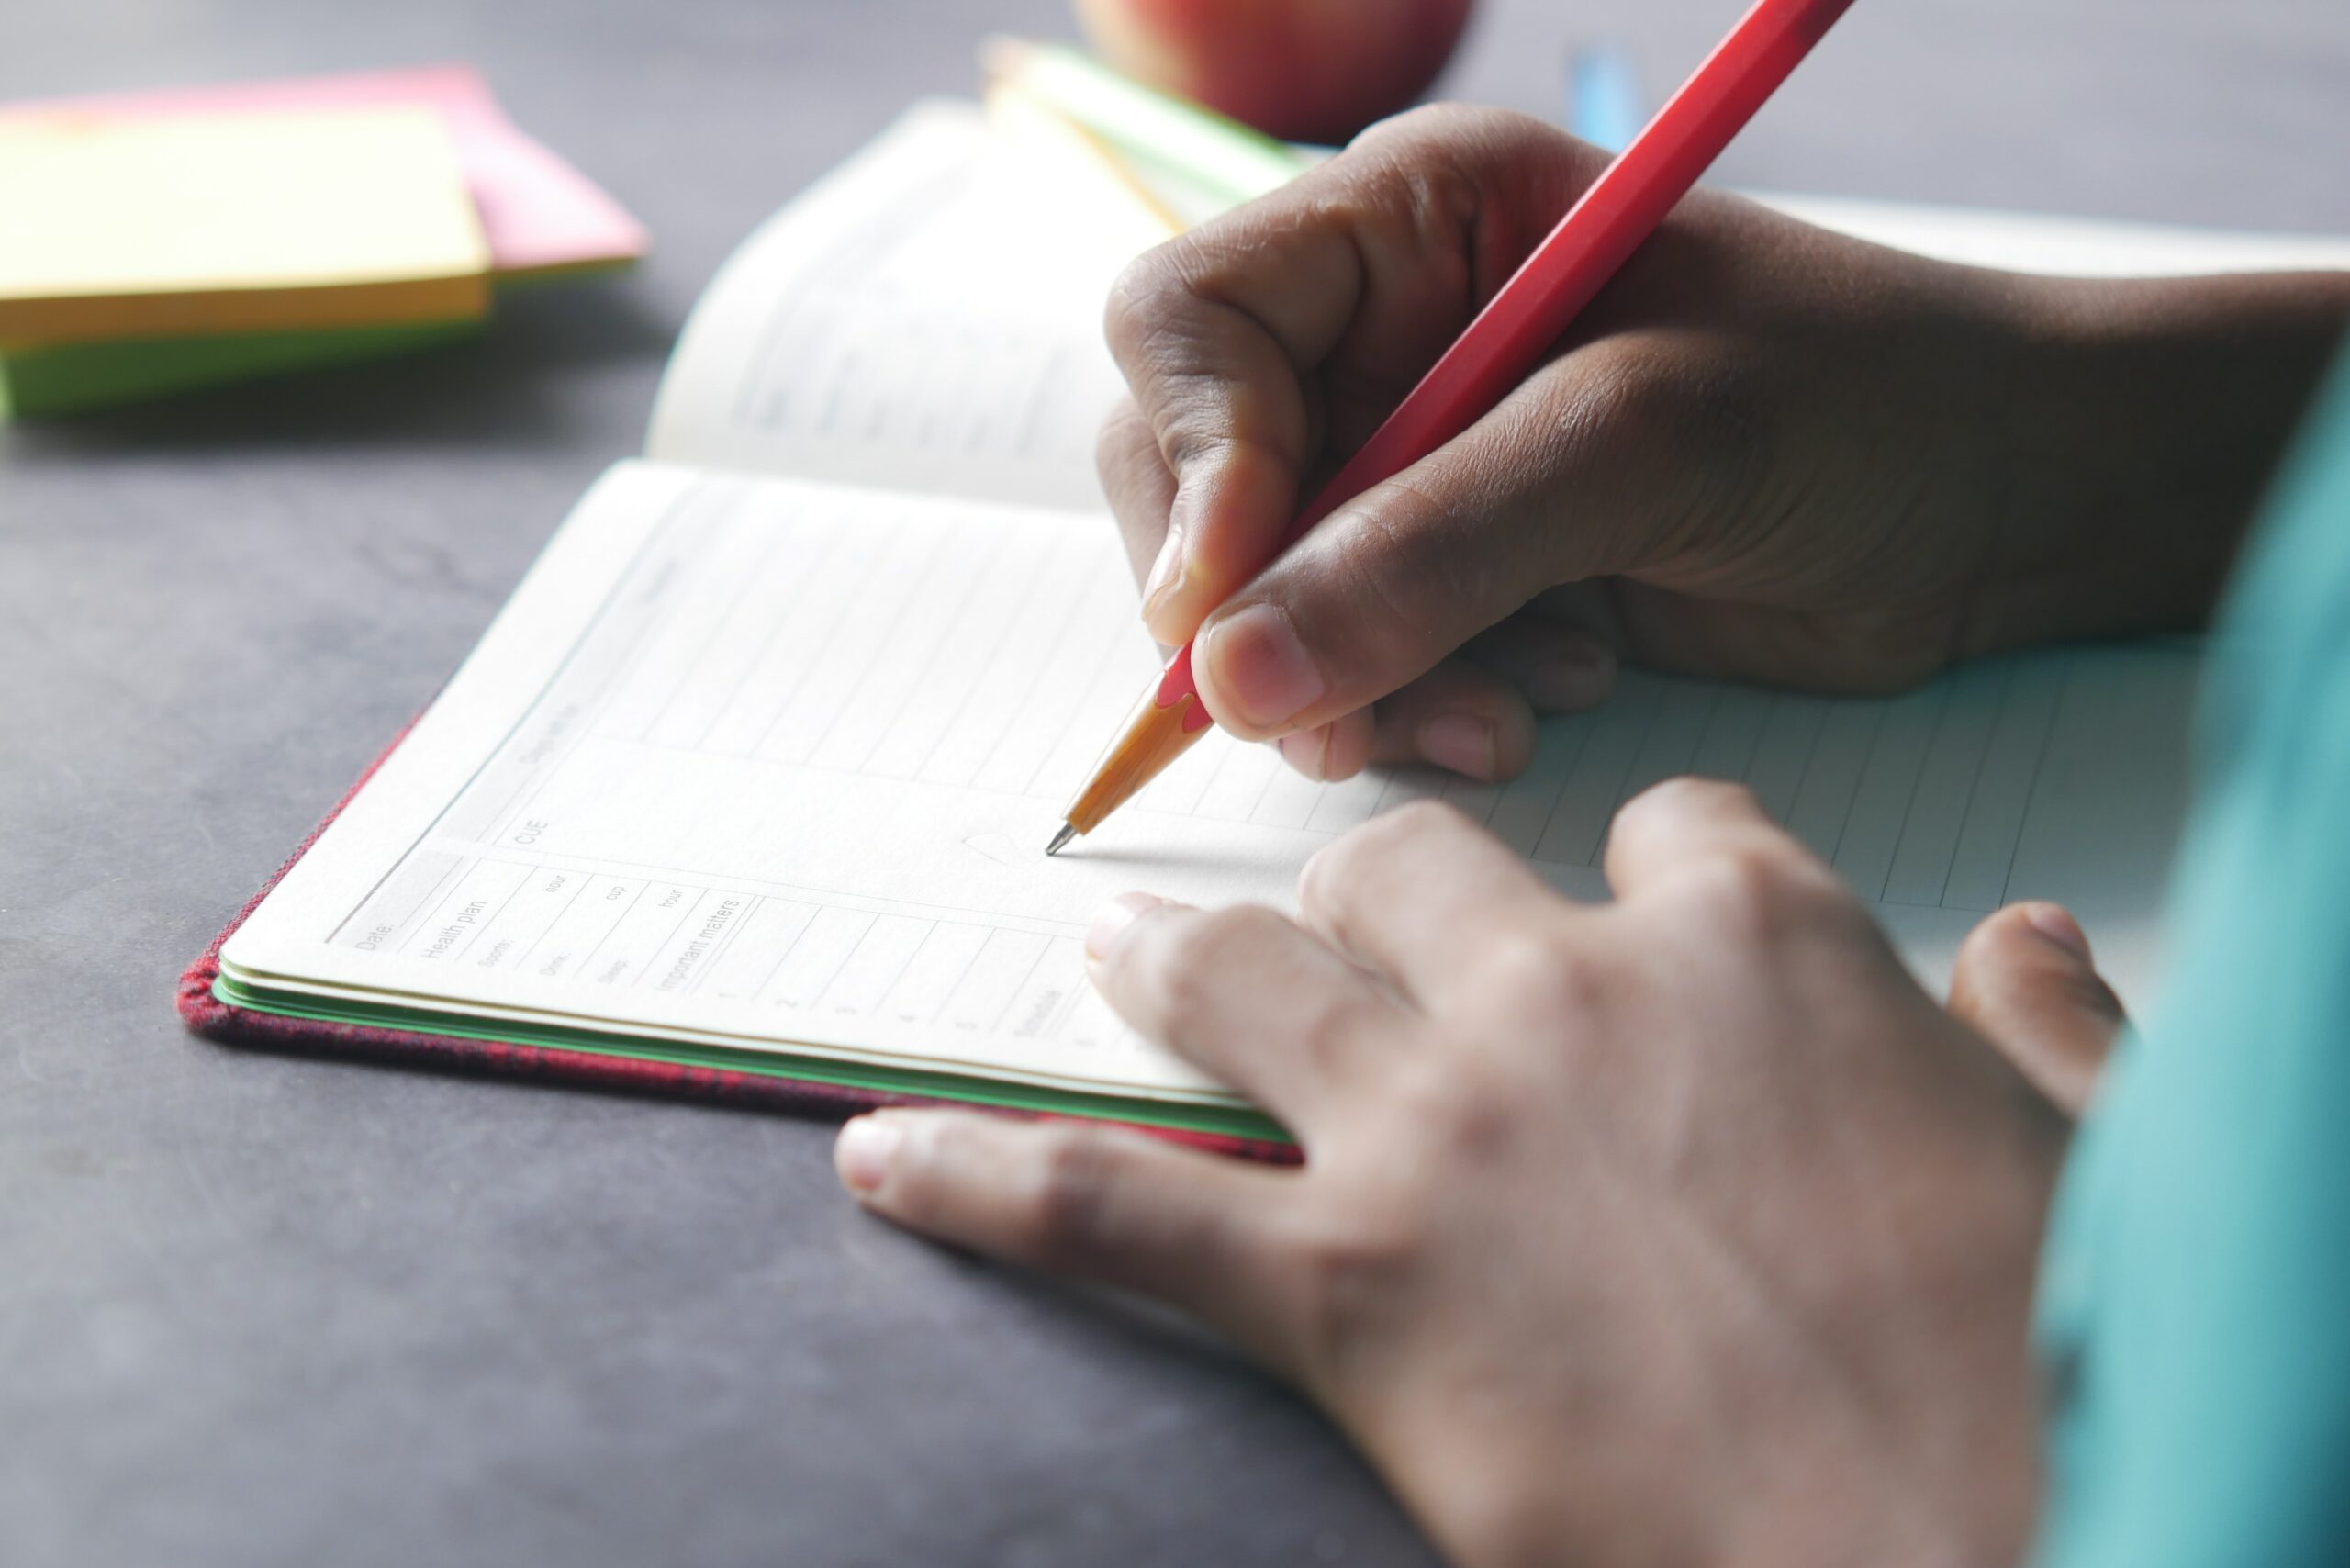 image of someone's hand writing on a planner with a red pen.